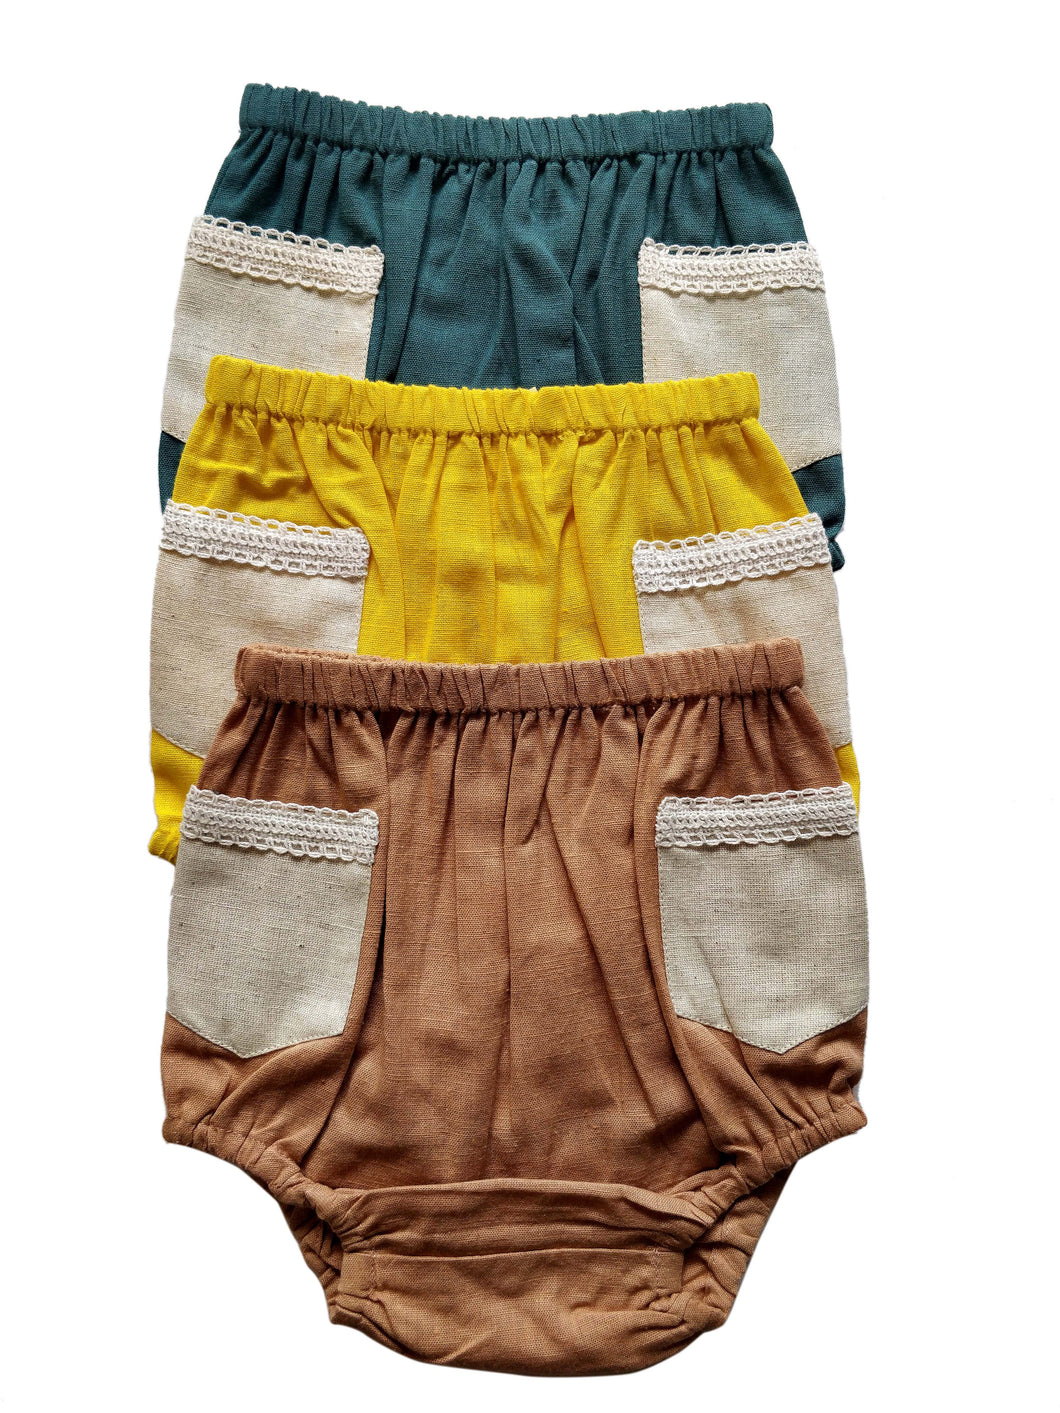 Pocket With Lace Detail Diaper Covers with in Blush, Yellow & Teal yobaby